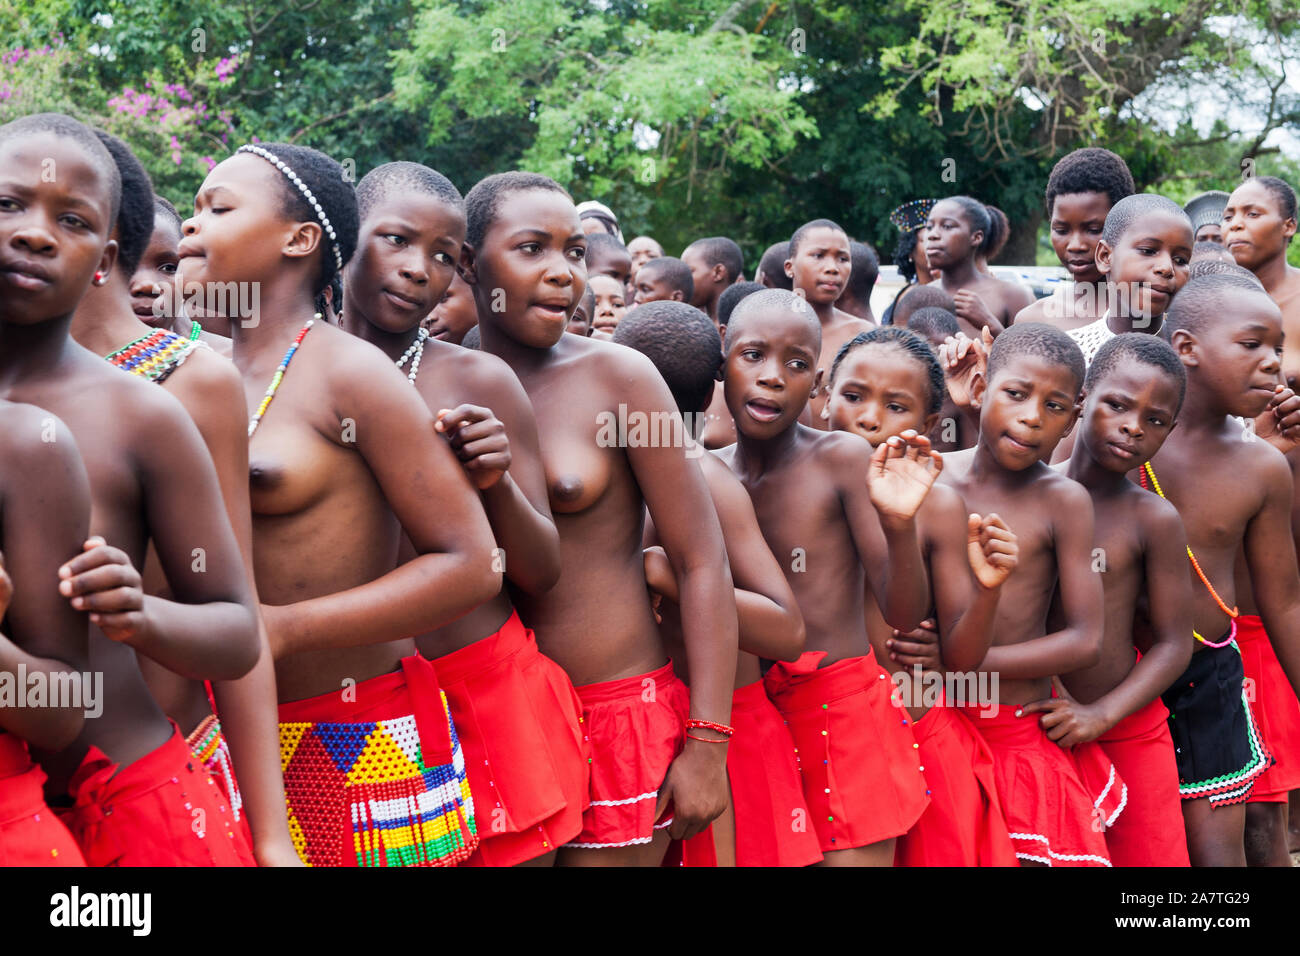 Young Zulu girls perform a traditional dance during the annual Tembe Marula Festival in KwaZulu-Natal, South Africa. Stock Photo